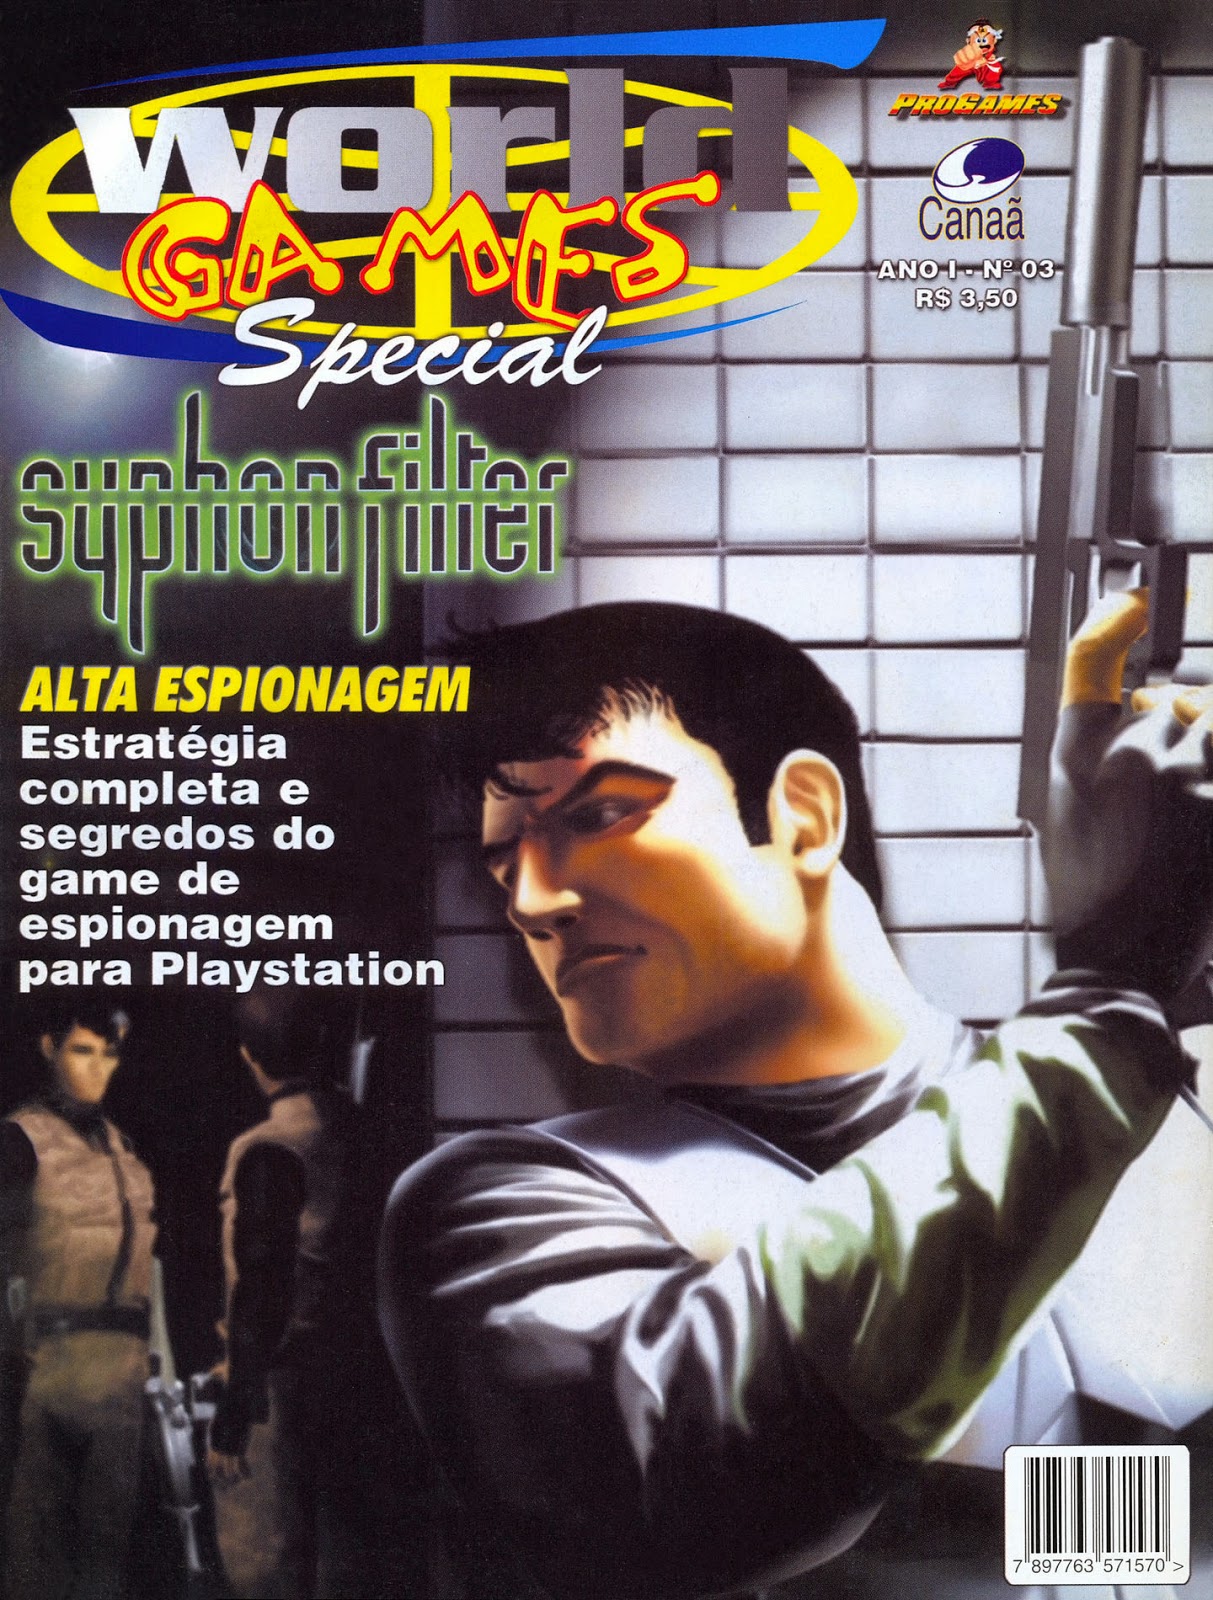 Save Games/Play Gaming (Ed. Minuano) – Retroavengers